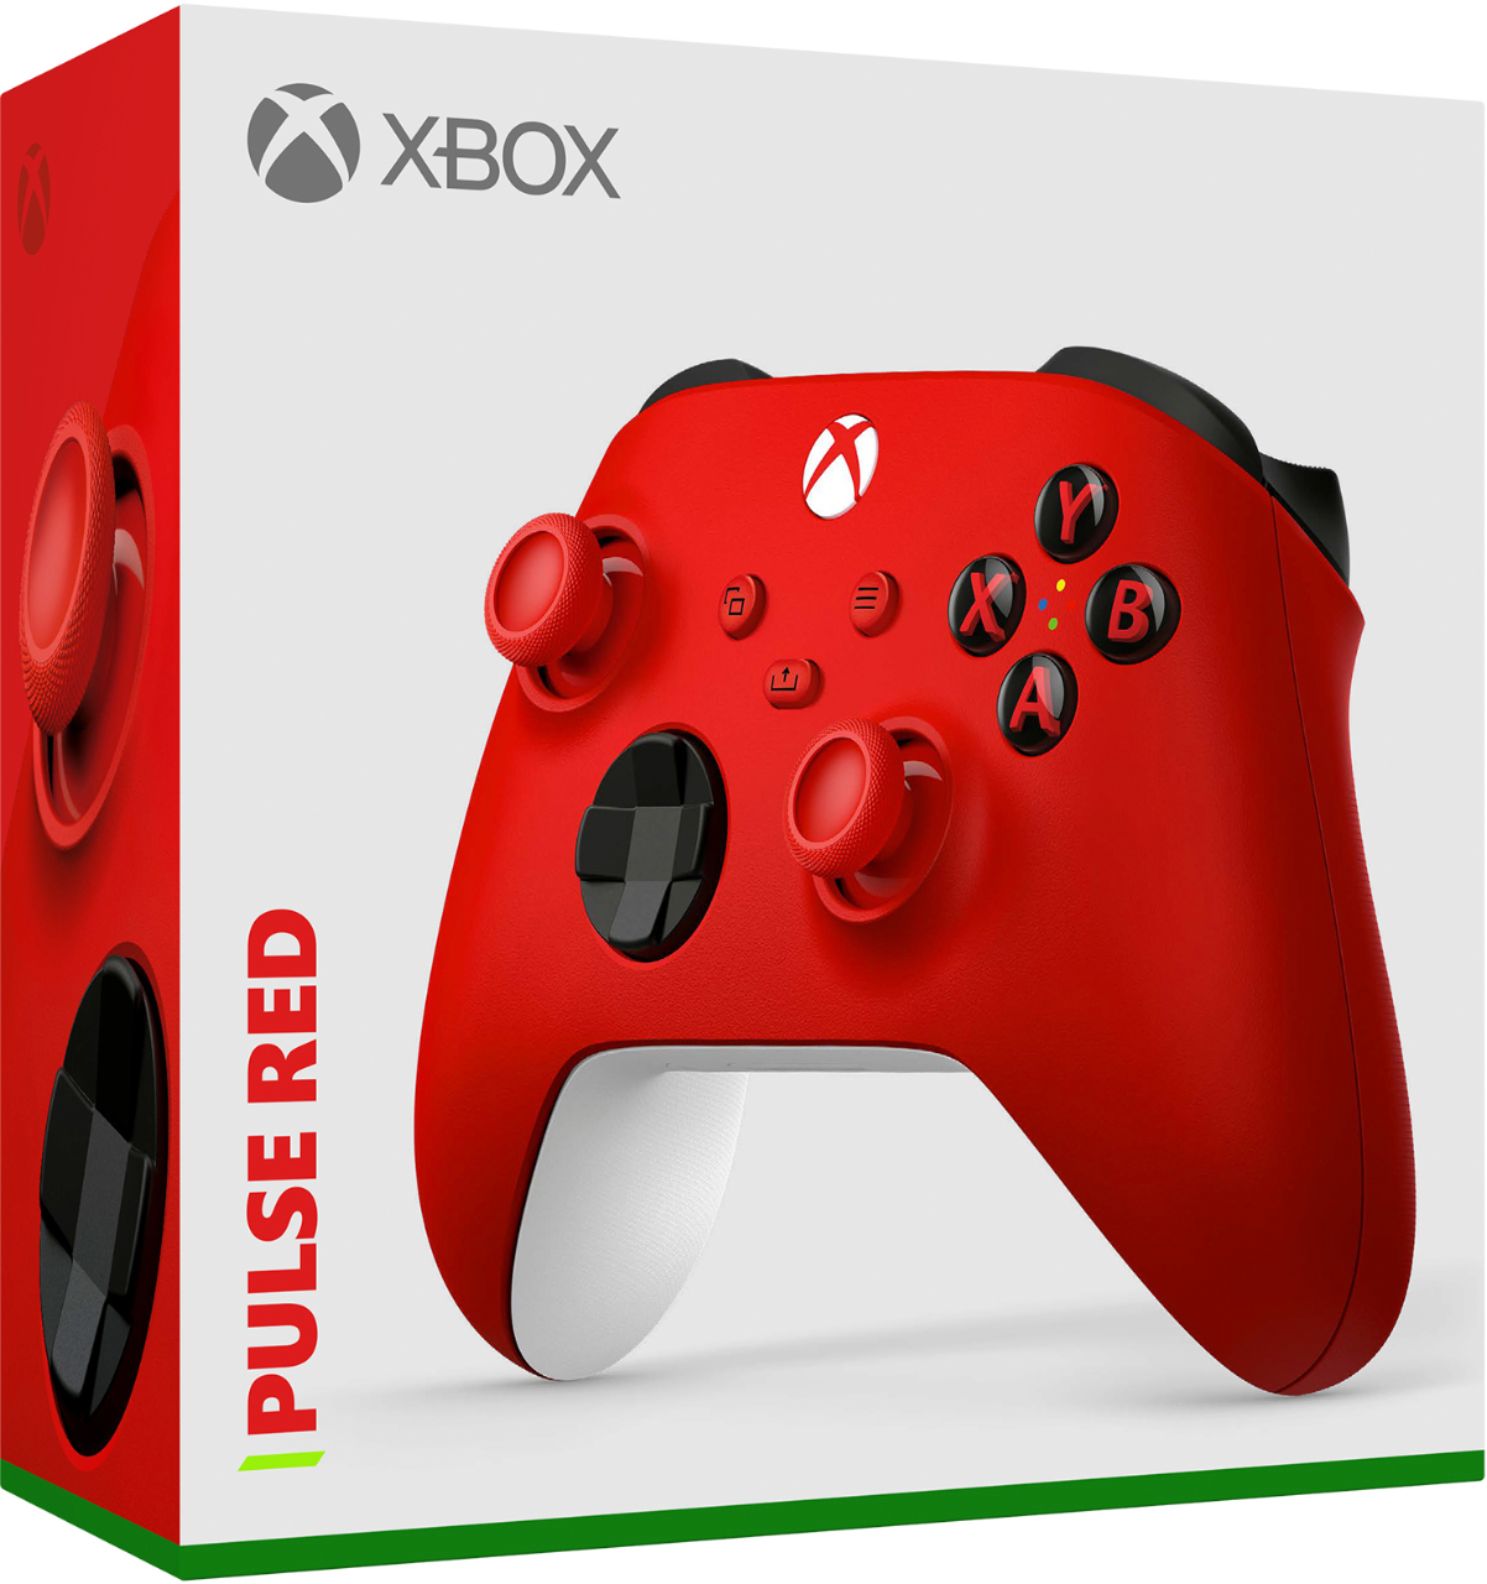 REDSTORM Wireless Gamepad Gaming Controller for Xbox One/One S/One